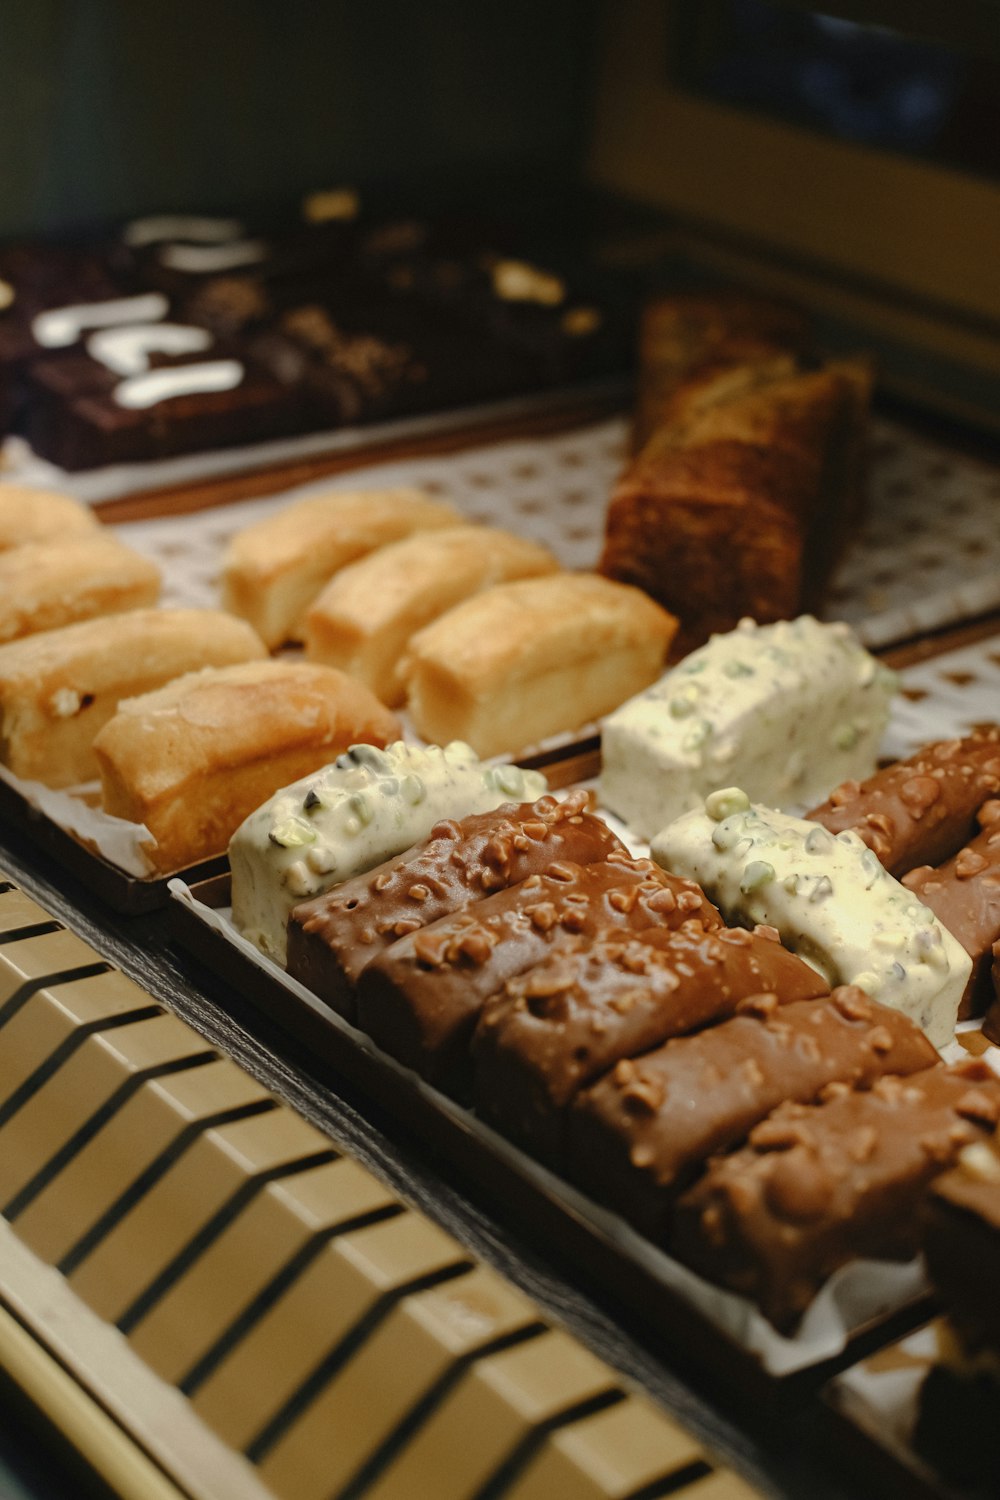 a variety of pastries on display in a display case